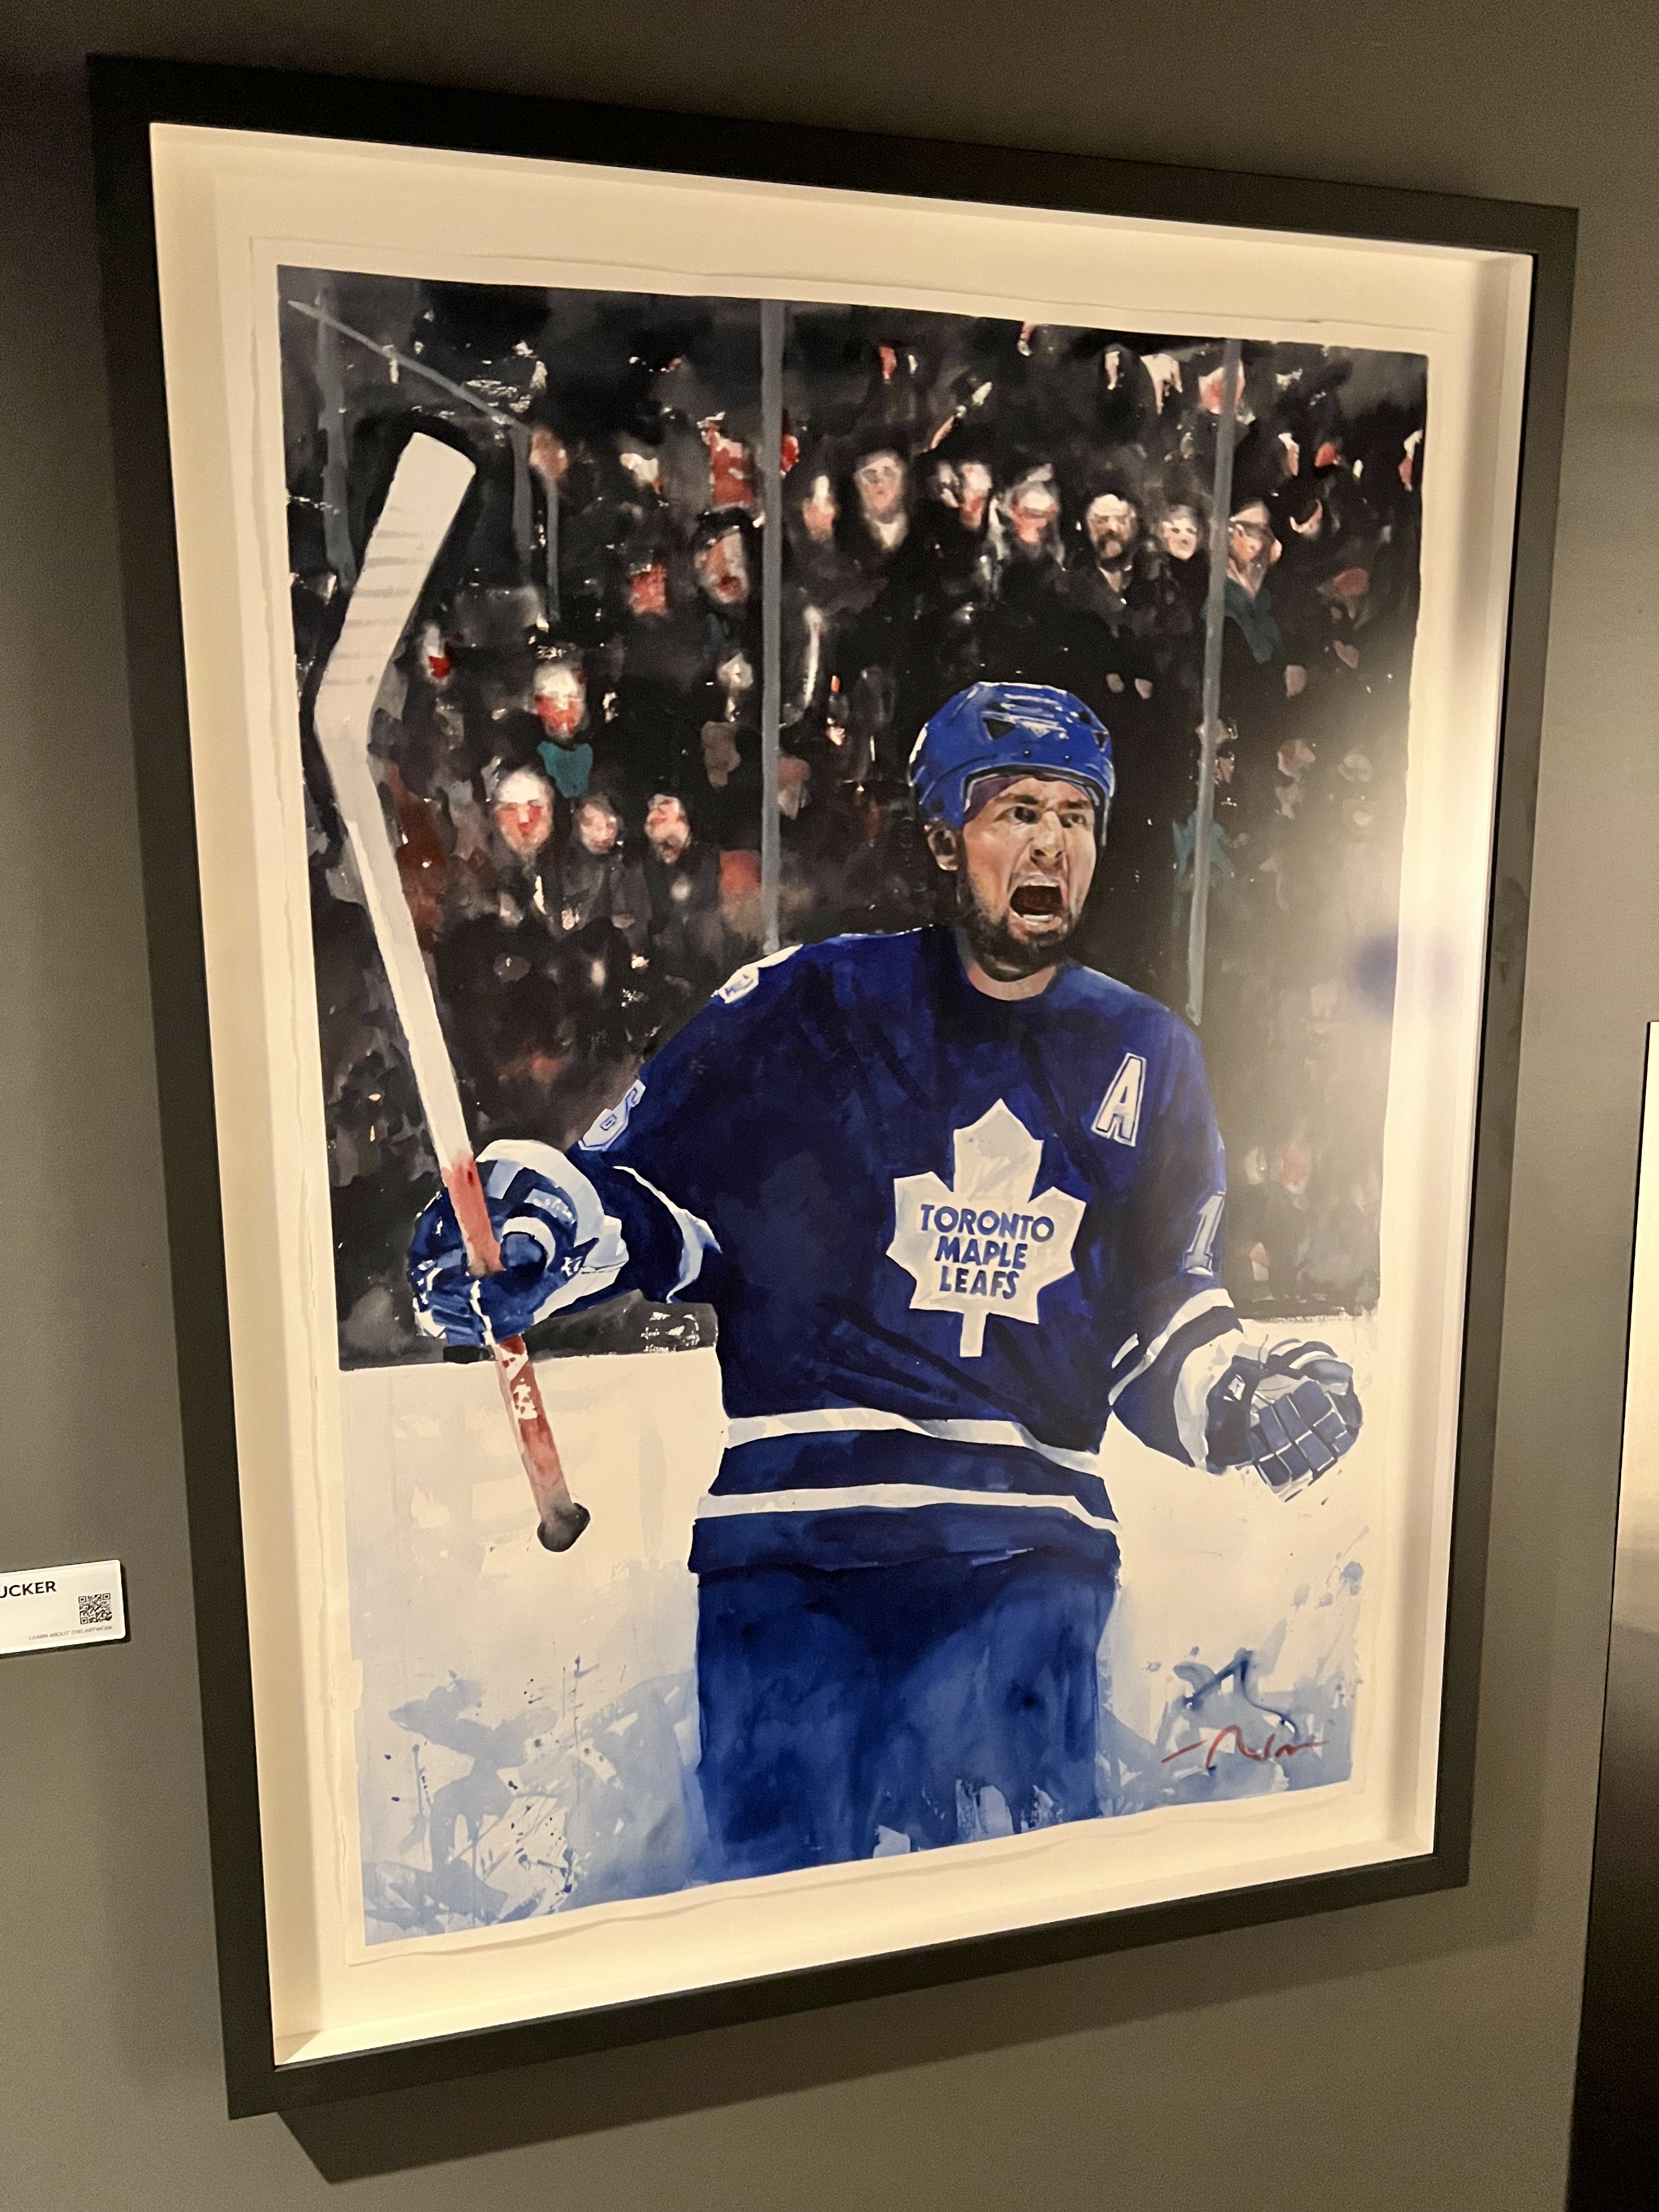 Darcy Tucker meet and greet this Sunday in Brampton. : r/leafs